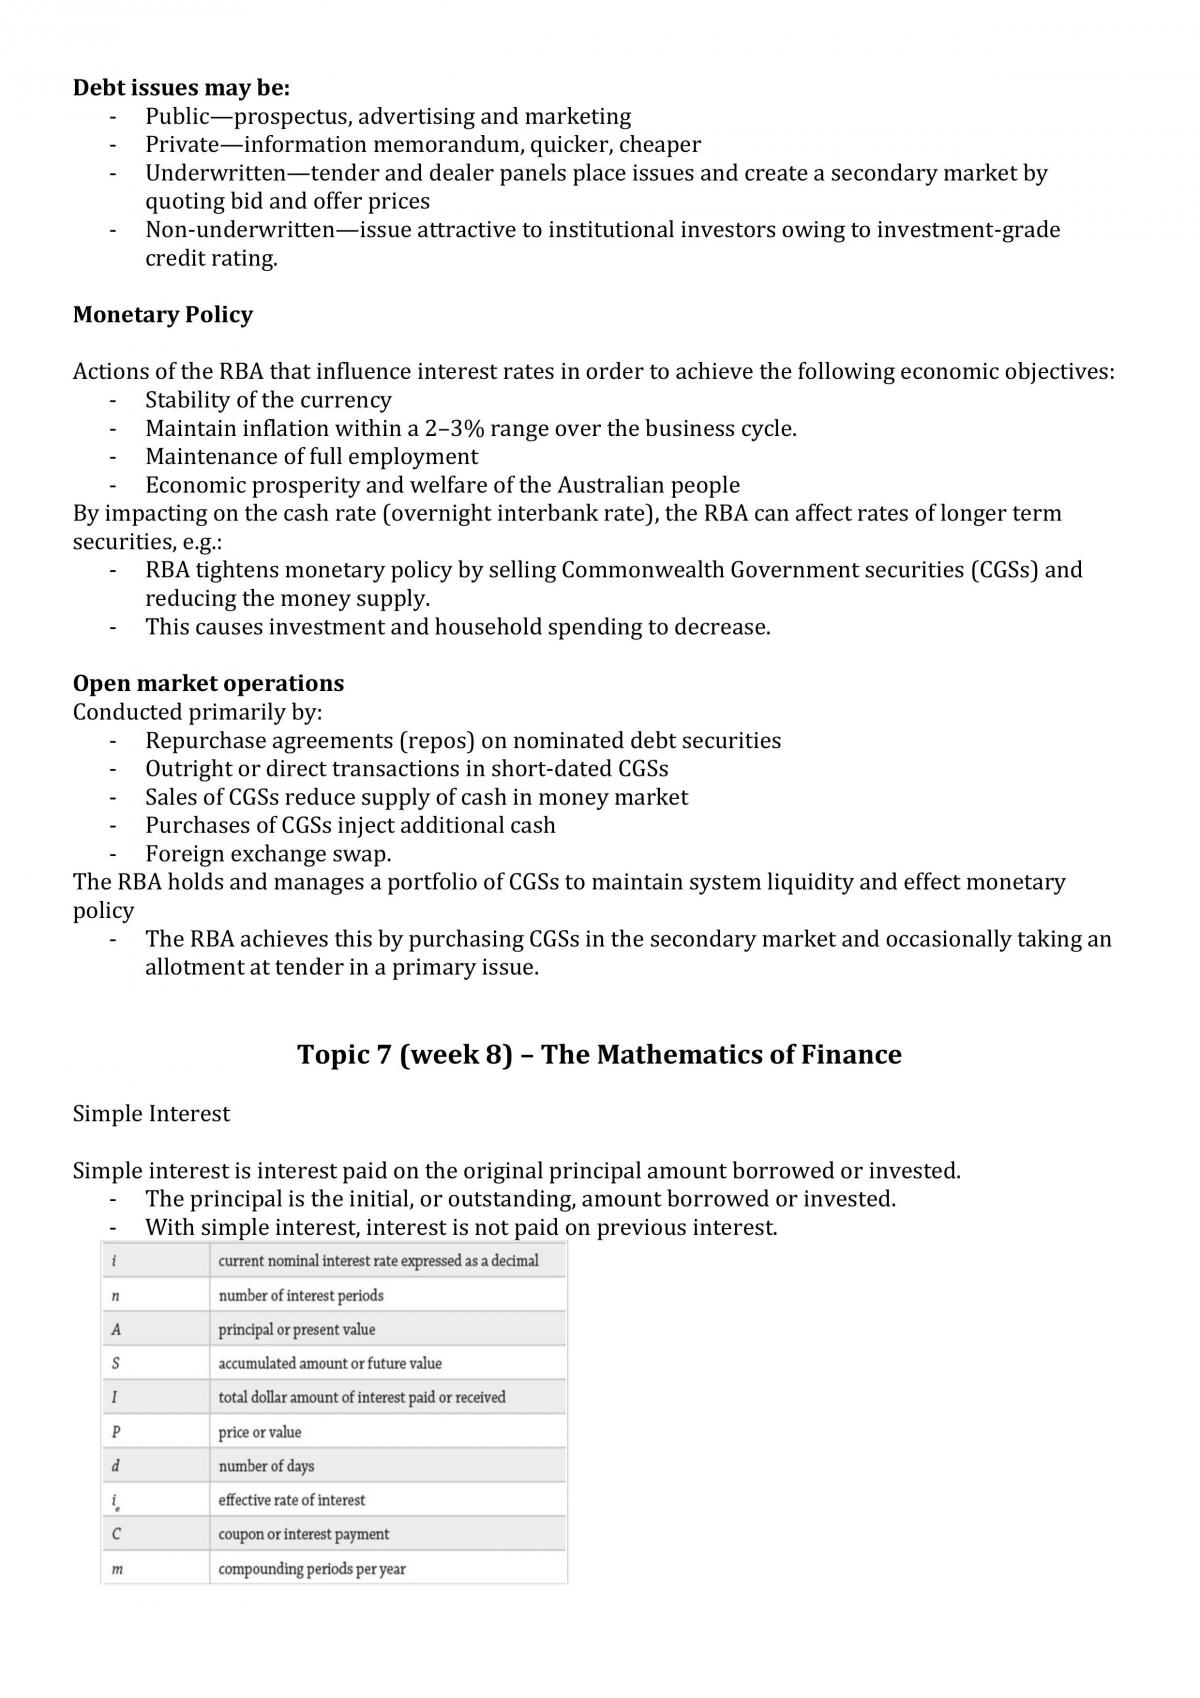 Financial Institutions and Markets Notes - Page 24